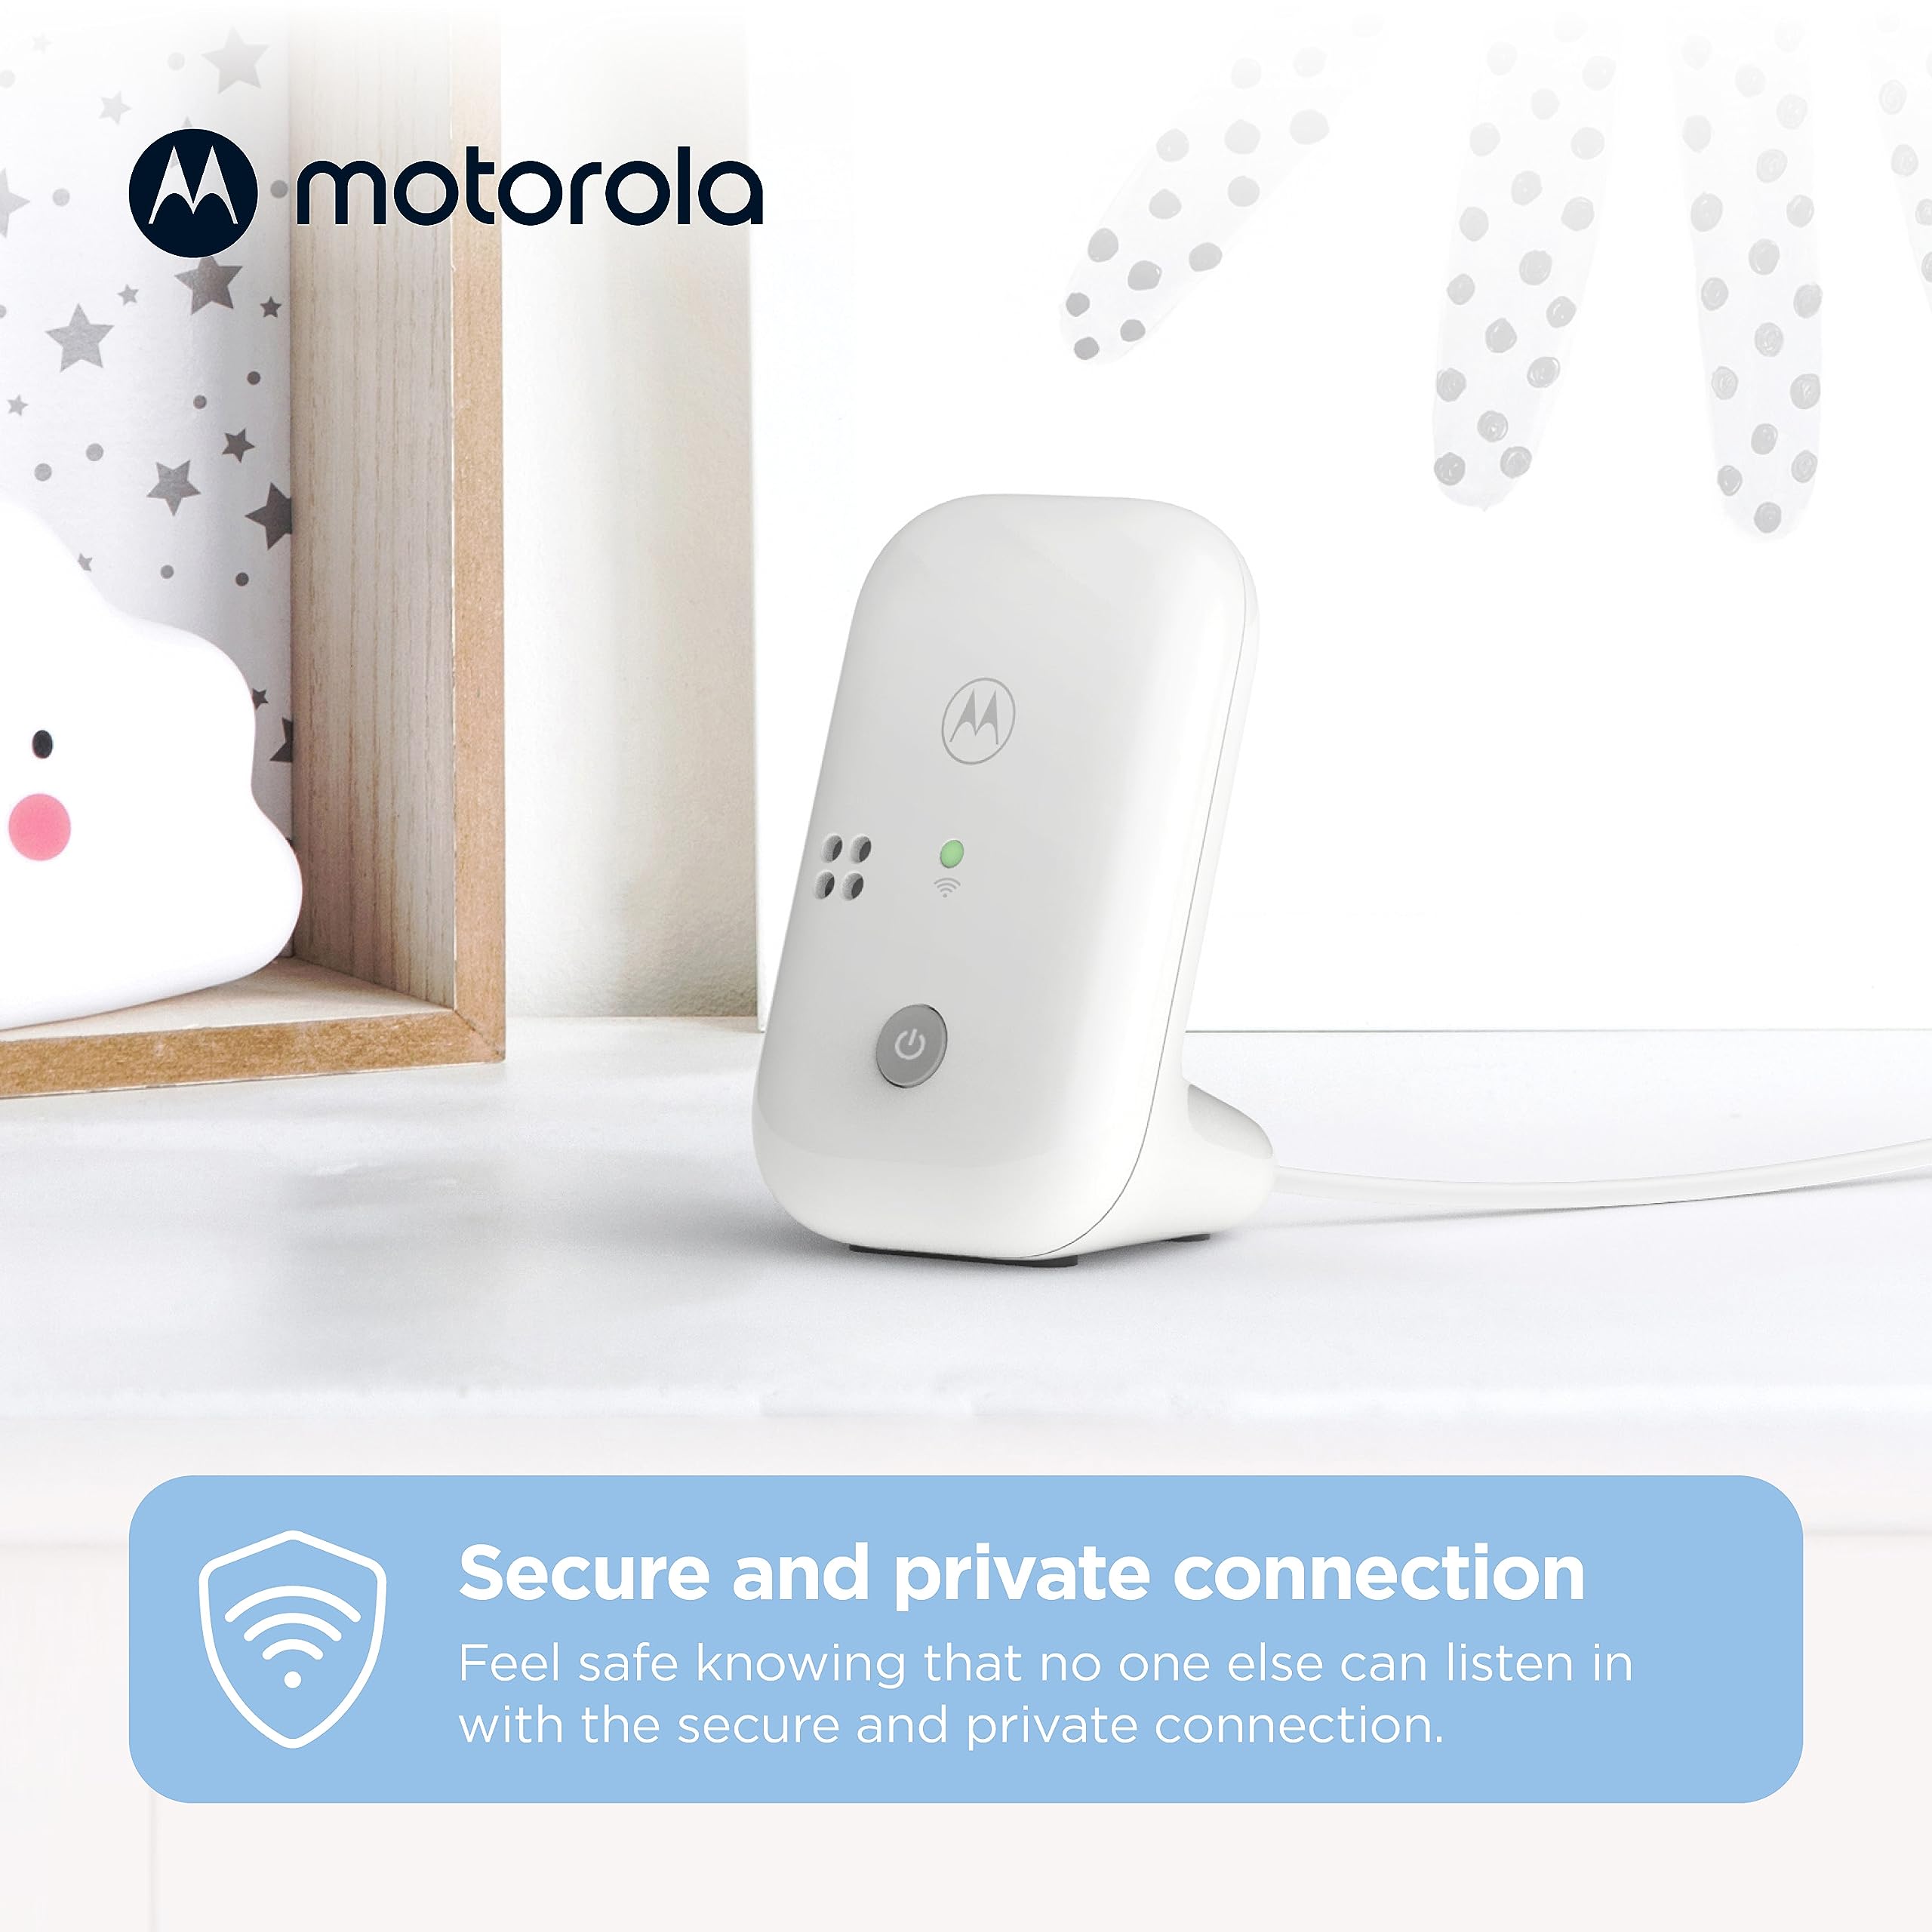 Motorola PIP10 Audio Baby Monitor - 1000ft Range, Secure & Private Connection, High-Sensitivity Mic, Volume Control, Alert Detection Light, Portable Parent Unit (Outlet or AAA Battery - NOT Included)